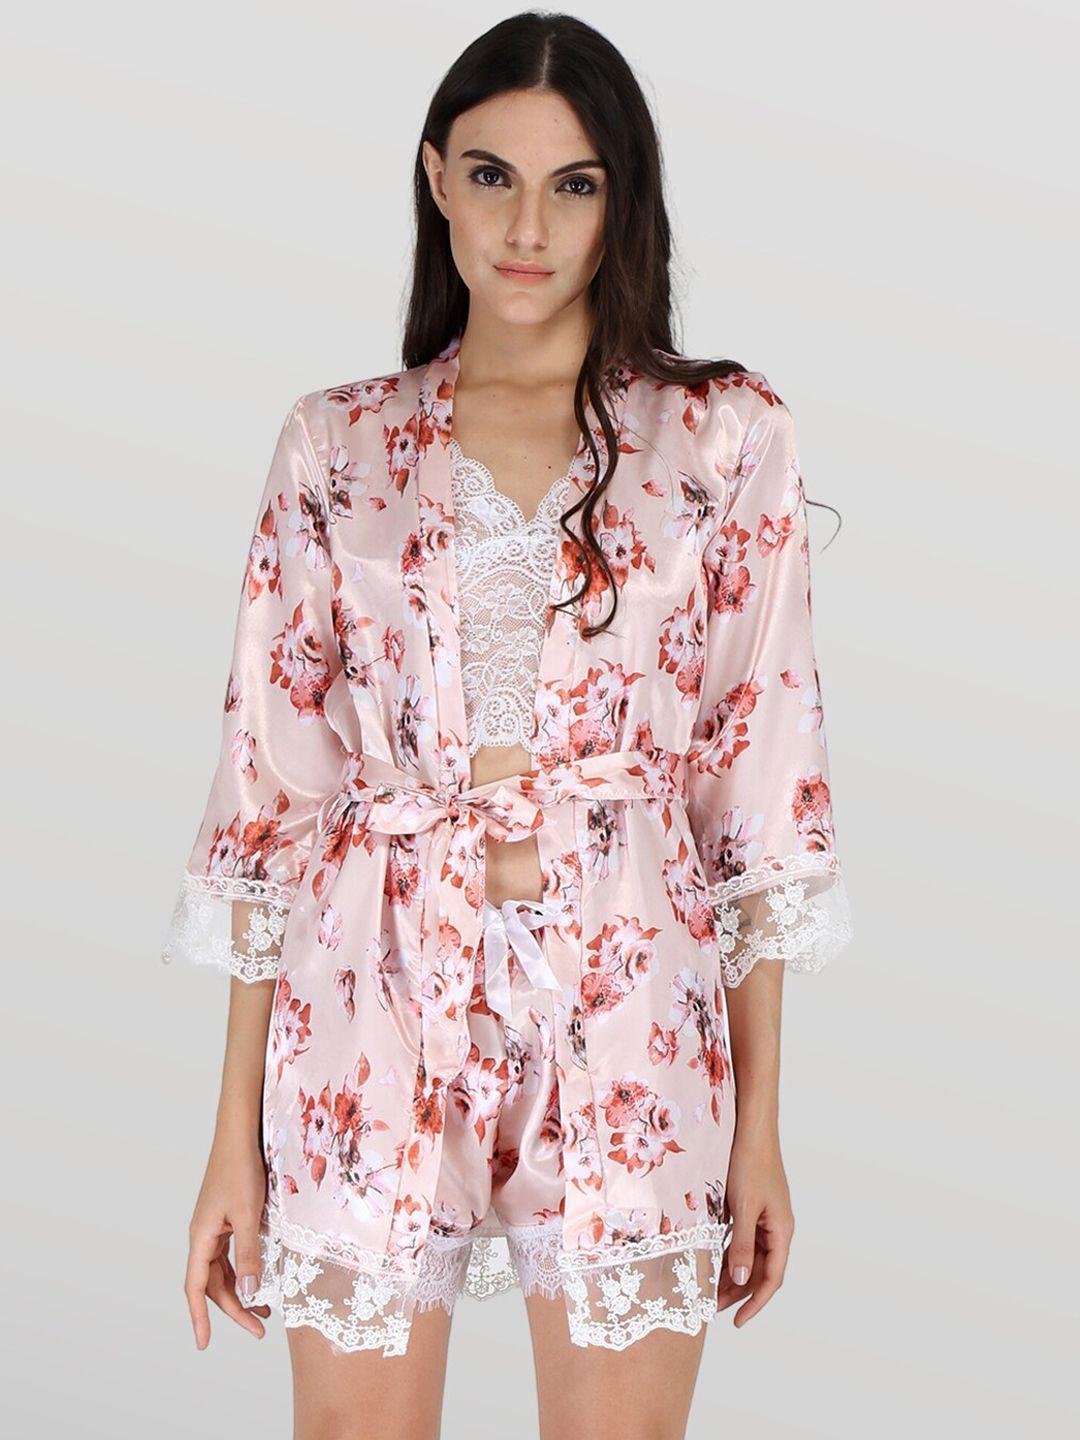 ezloot self design v-neck top & printed shorts with robe